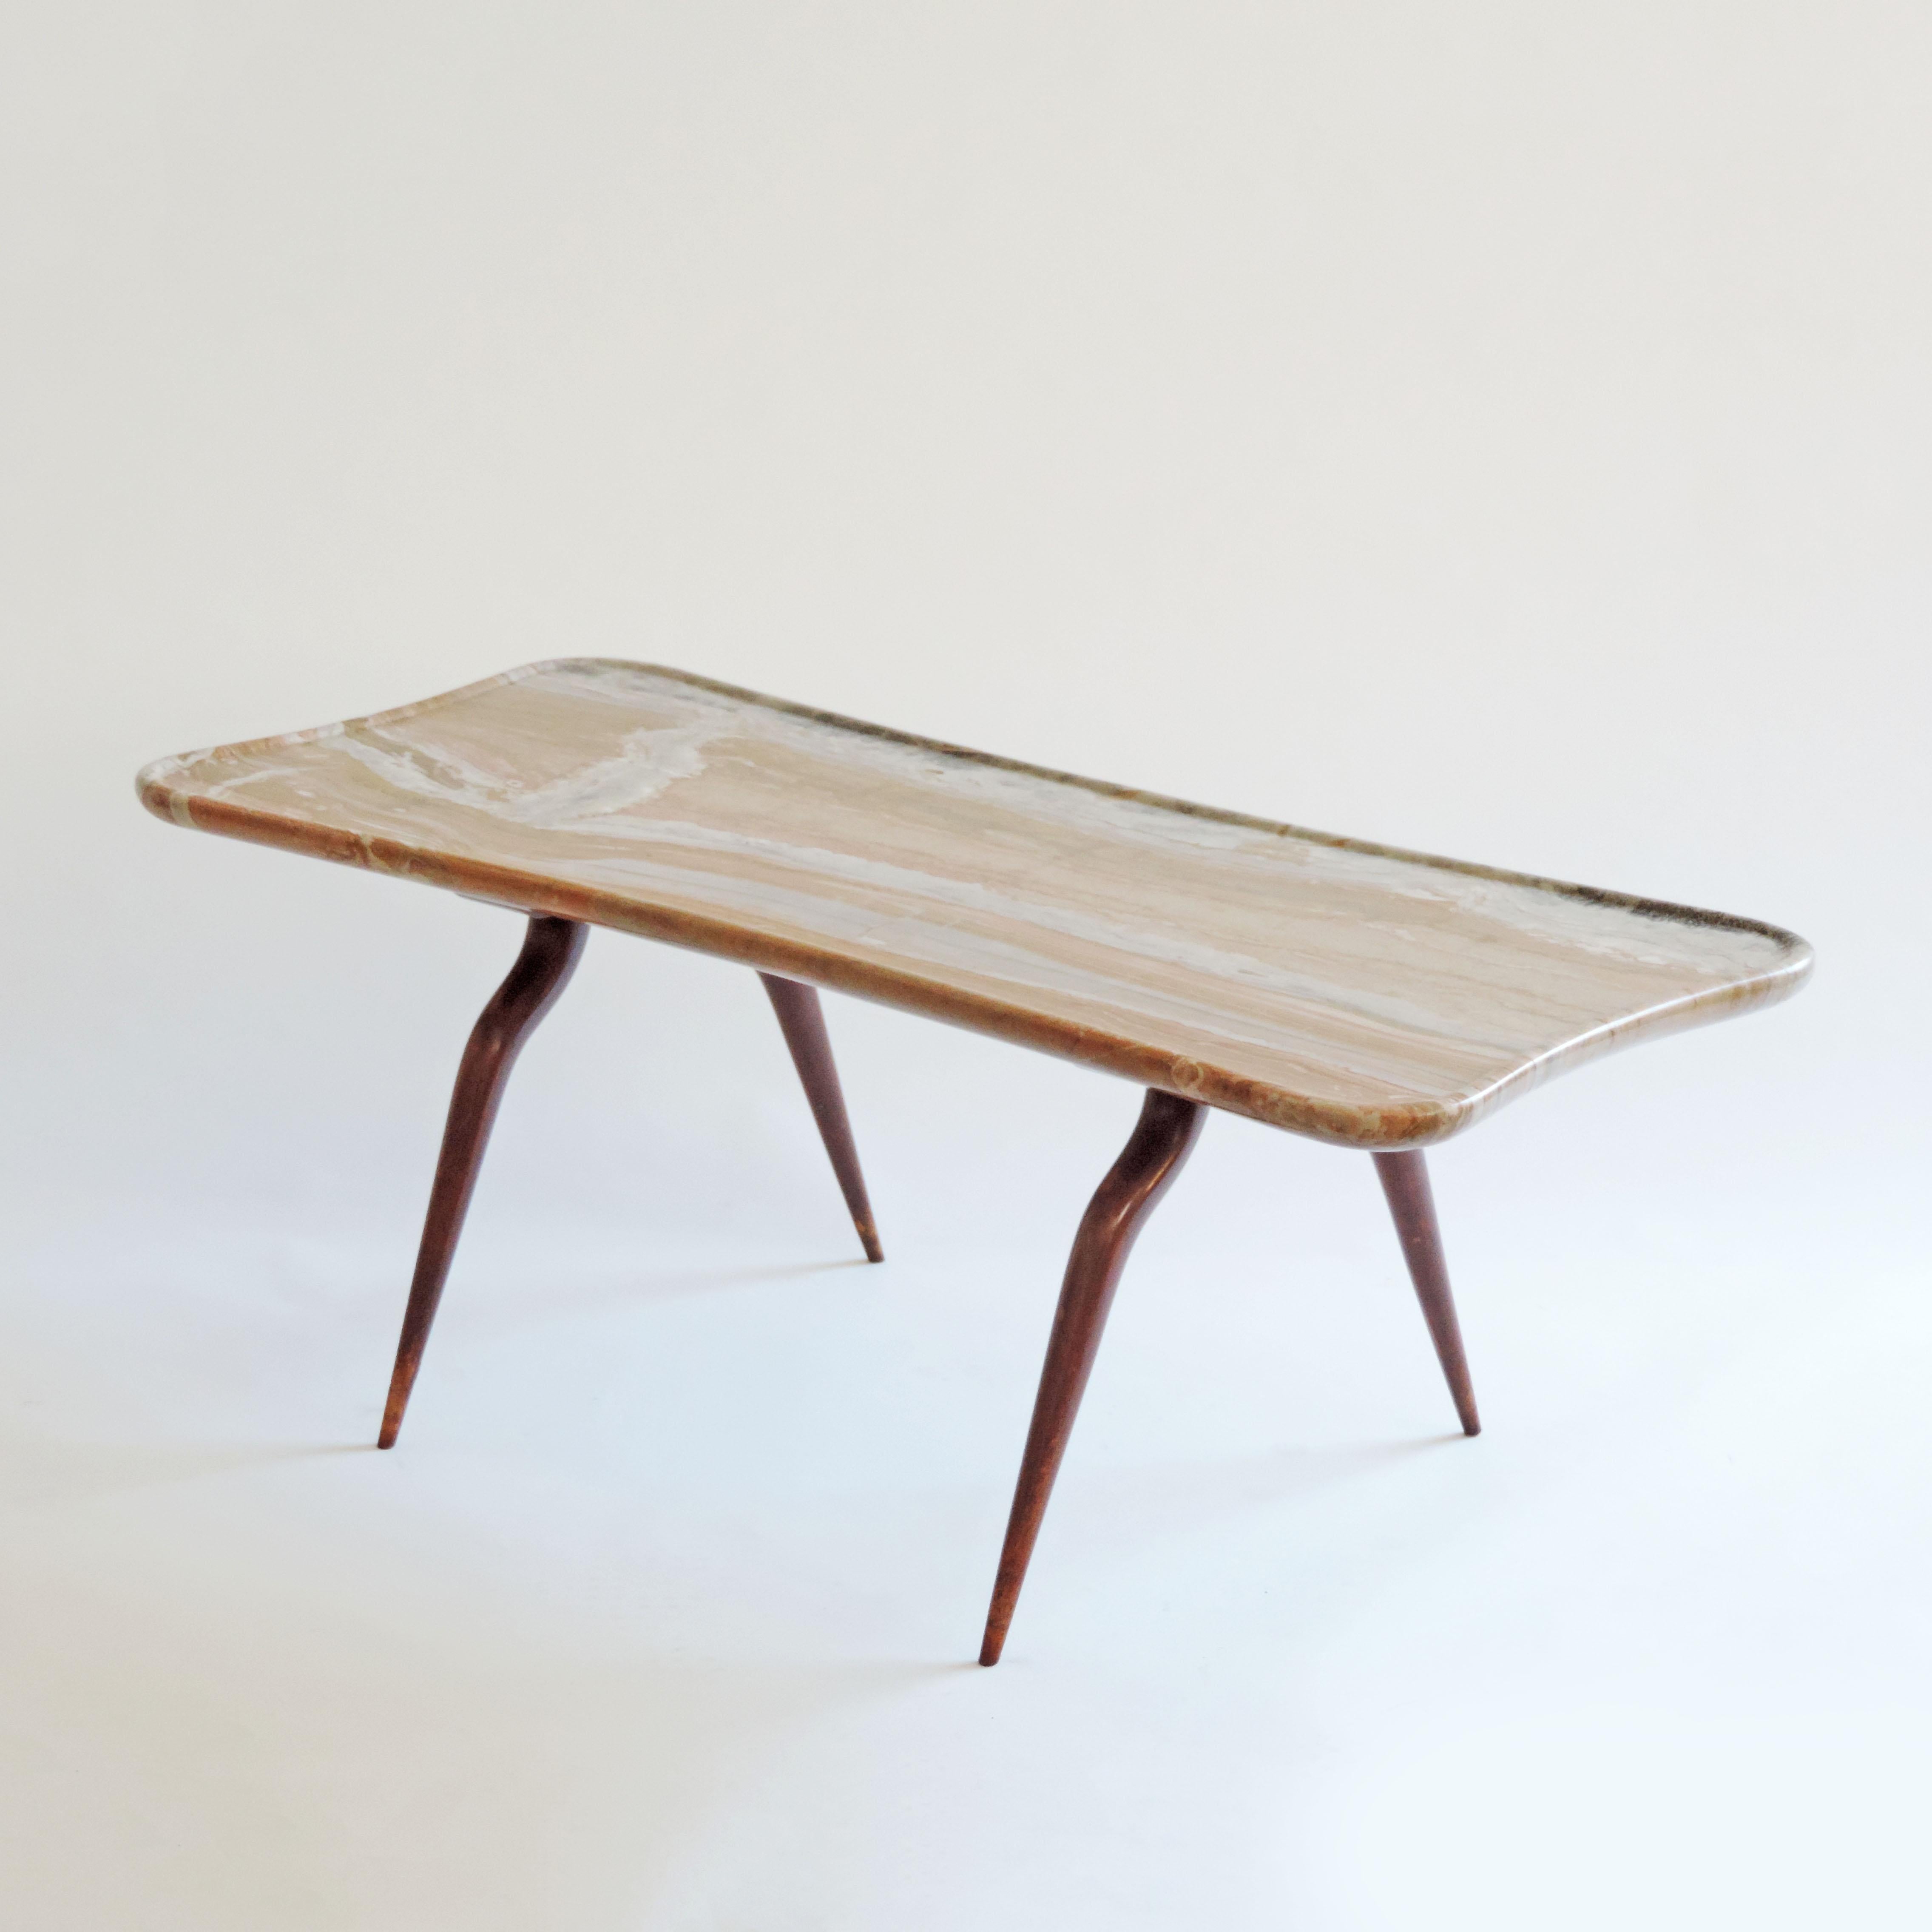 Italian Surrealist Fabrizio Clerici Coffee Table in Wood and Marble, Italy, 1940s For Sale